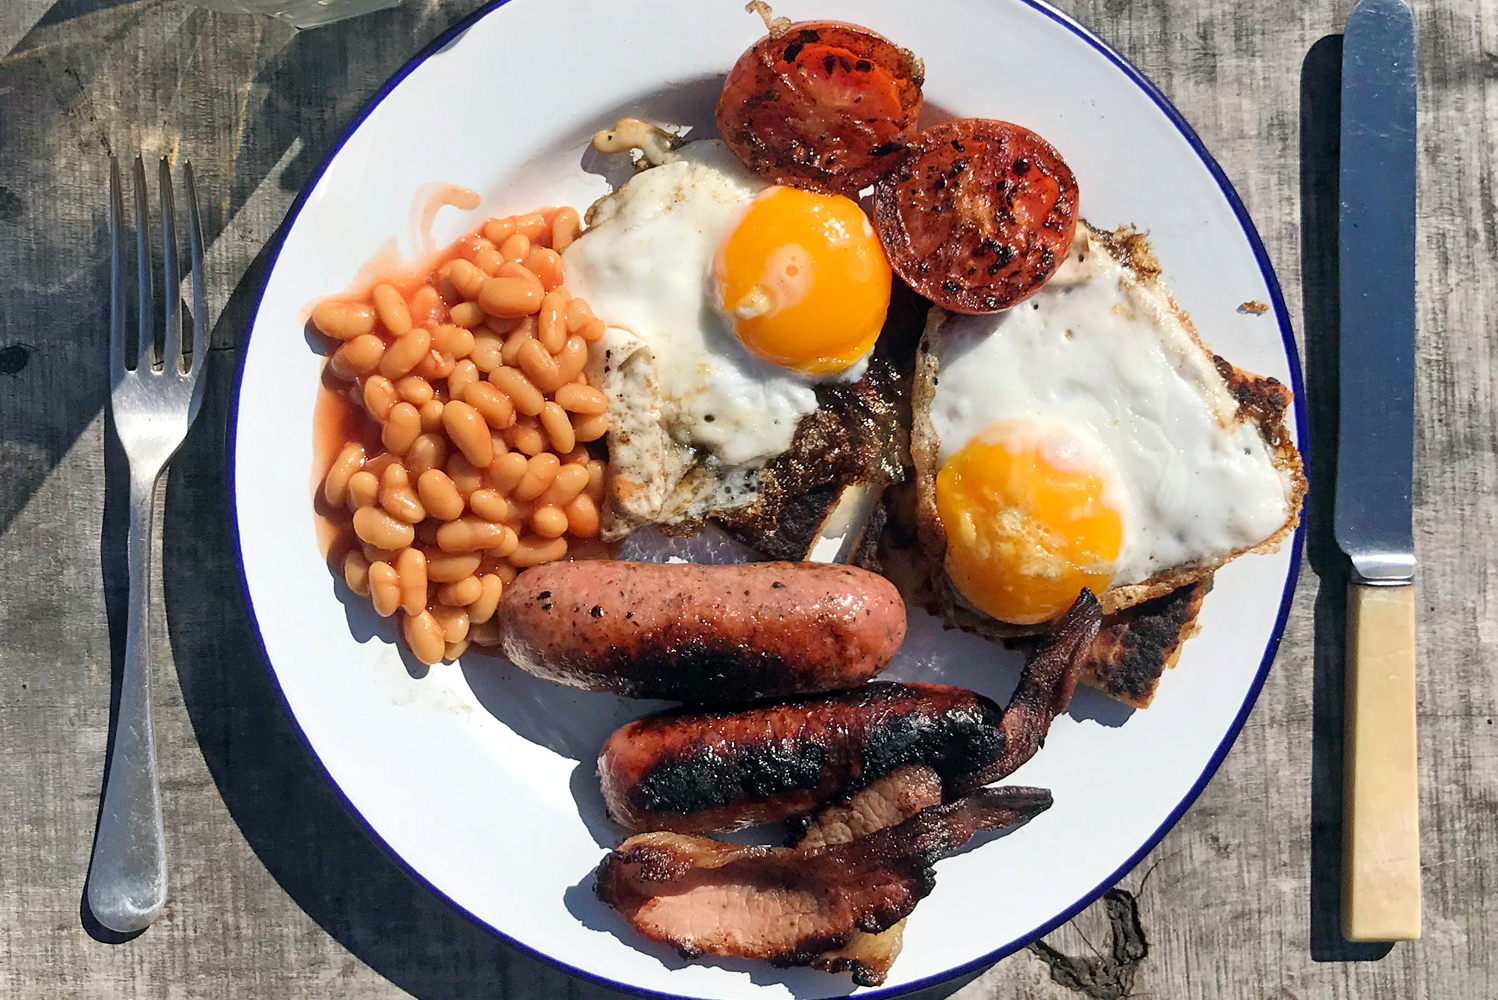 Breakfast cooked on the campfire ready to eat outside on an enamel plate with retro cutlery. Find out more guest information about Glamping at Wallops Wood and our booking extras